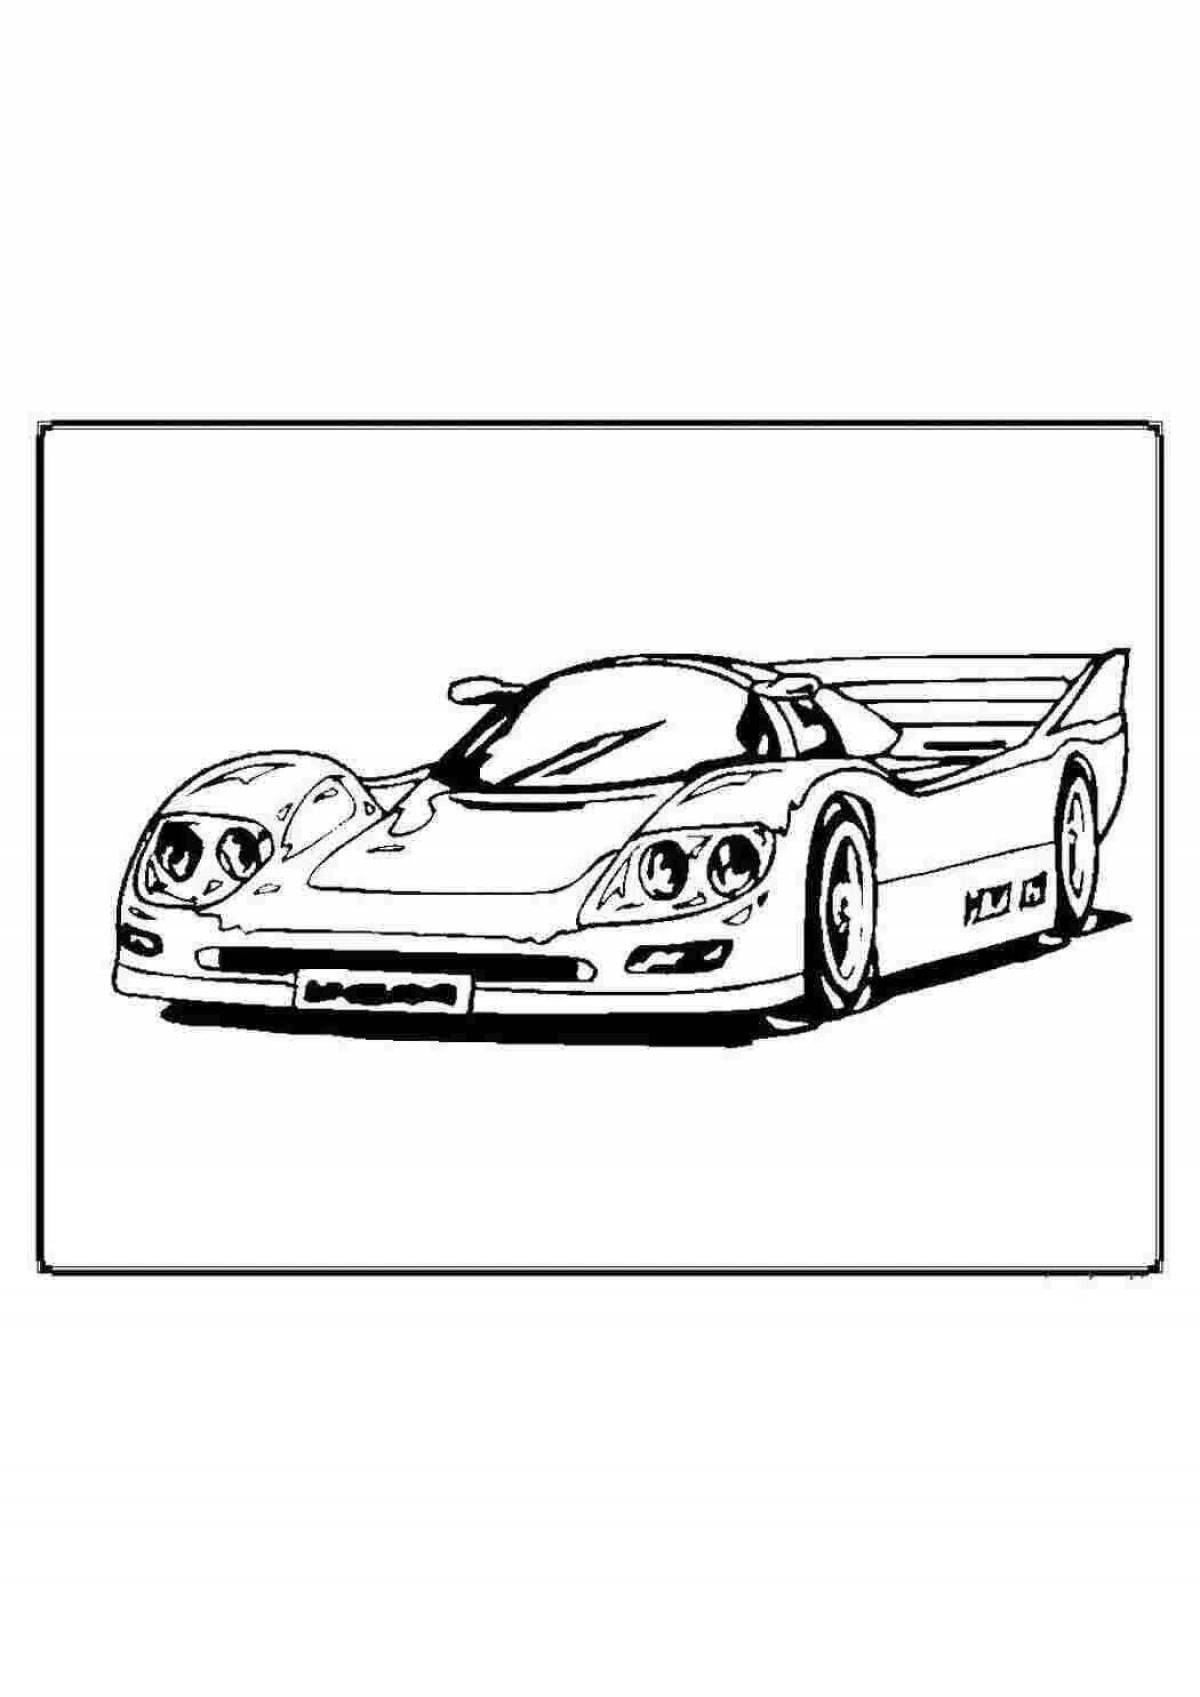 Colorful sports car coloring page